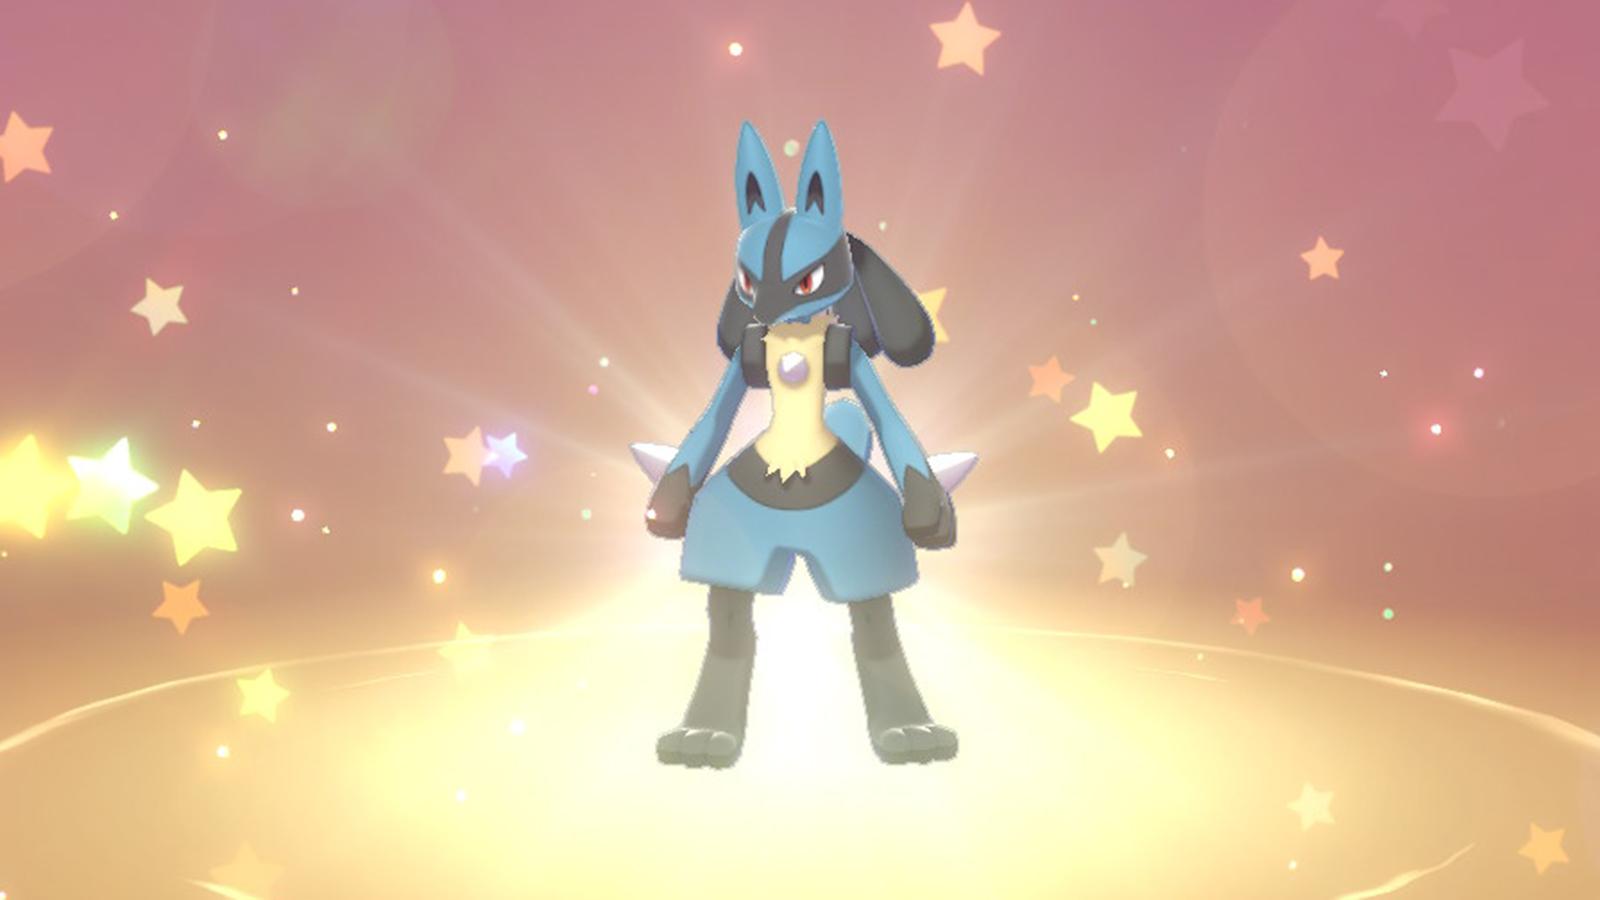 Ash's Lucario appearing in pokemon sword and shield as a mystery gift code